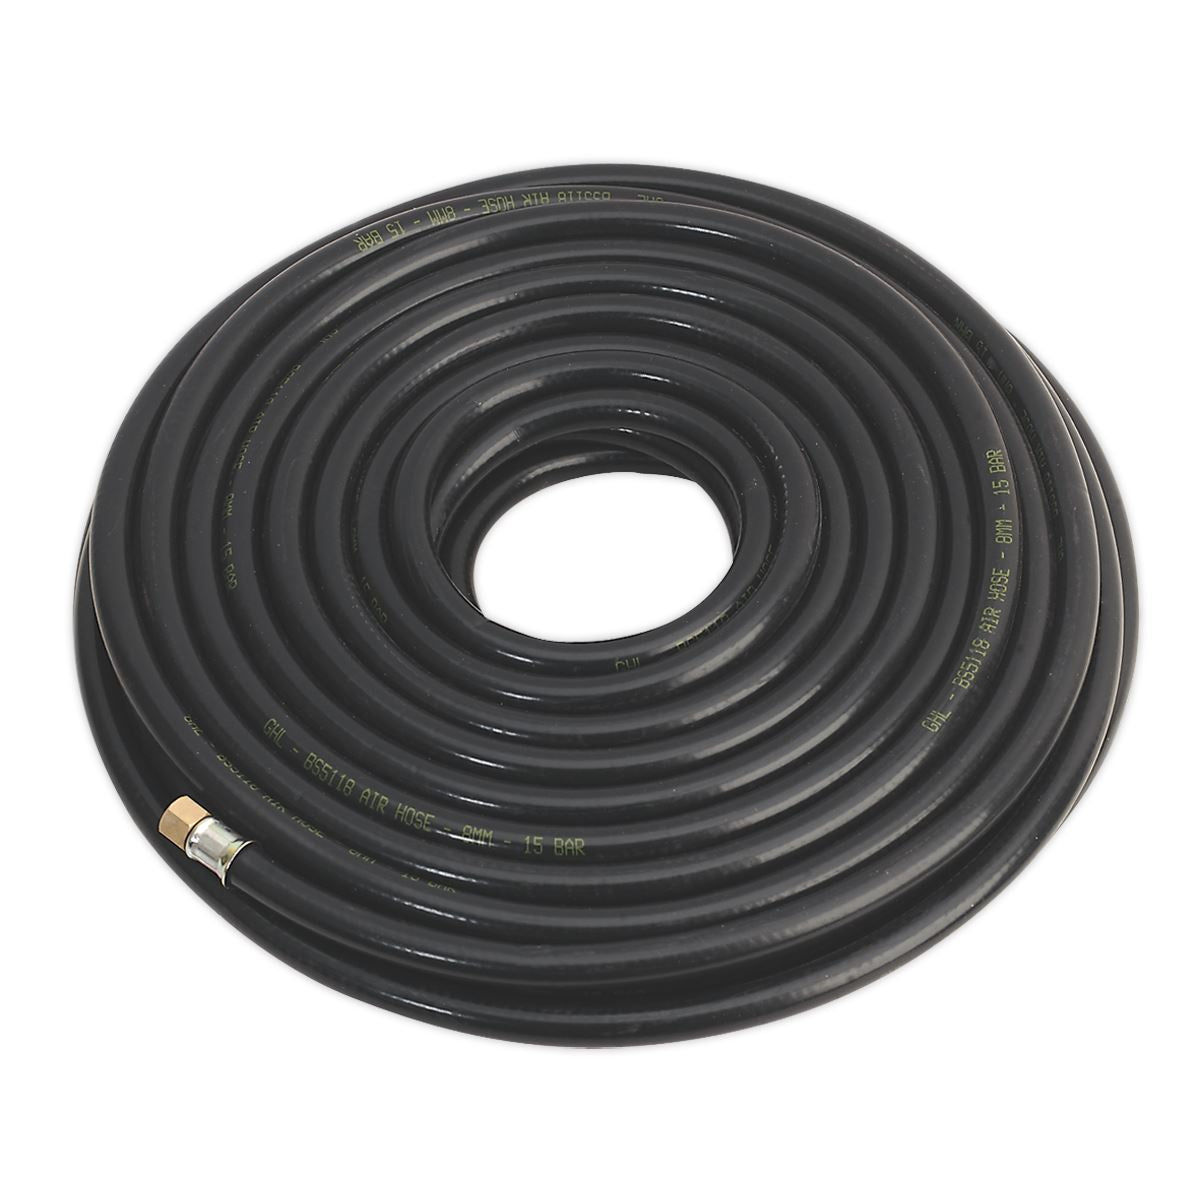 Sealey Air Hose 20m x Ø8mm with 1/4"BSP Unions Heavy-Duty